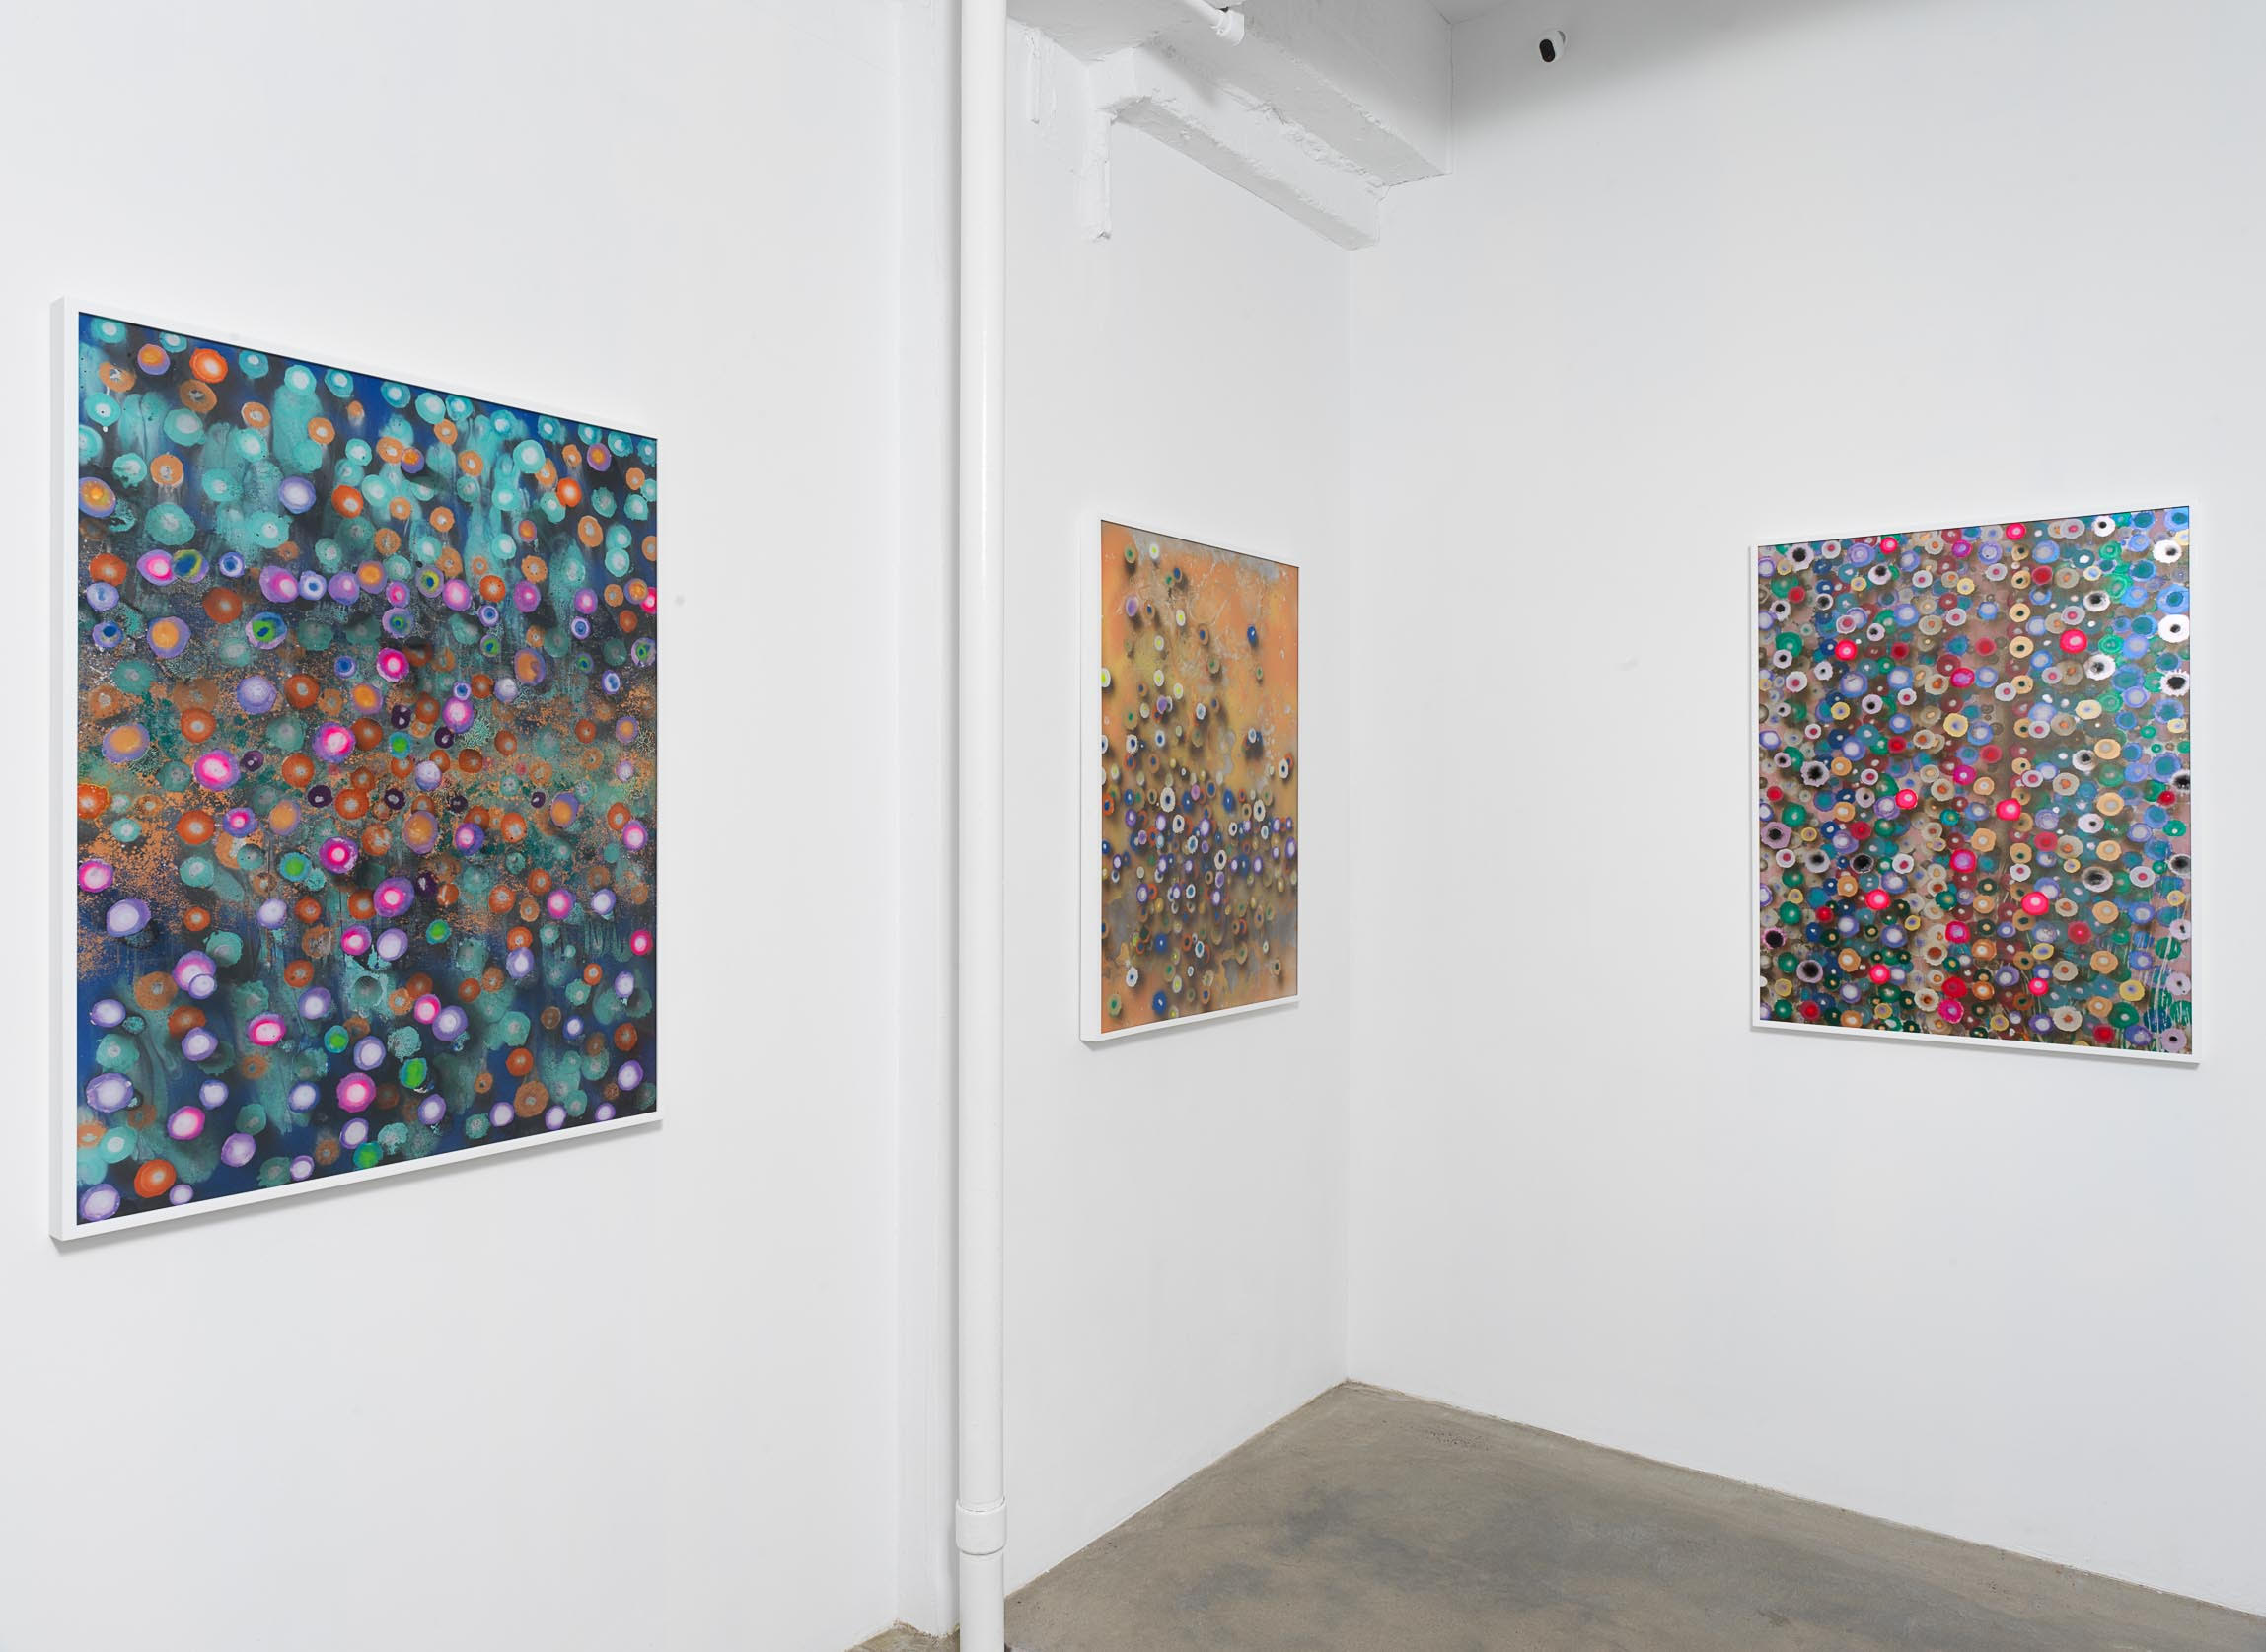 Installation view of Giacinto Occhionero's exhibition 'Tonic' showing paintings on plexiglass